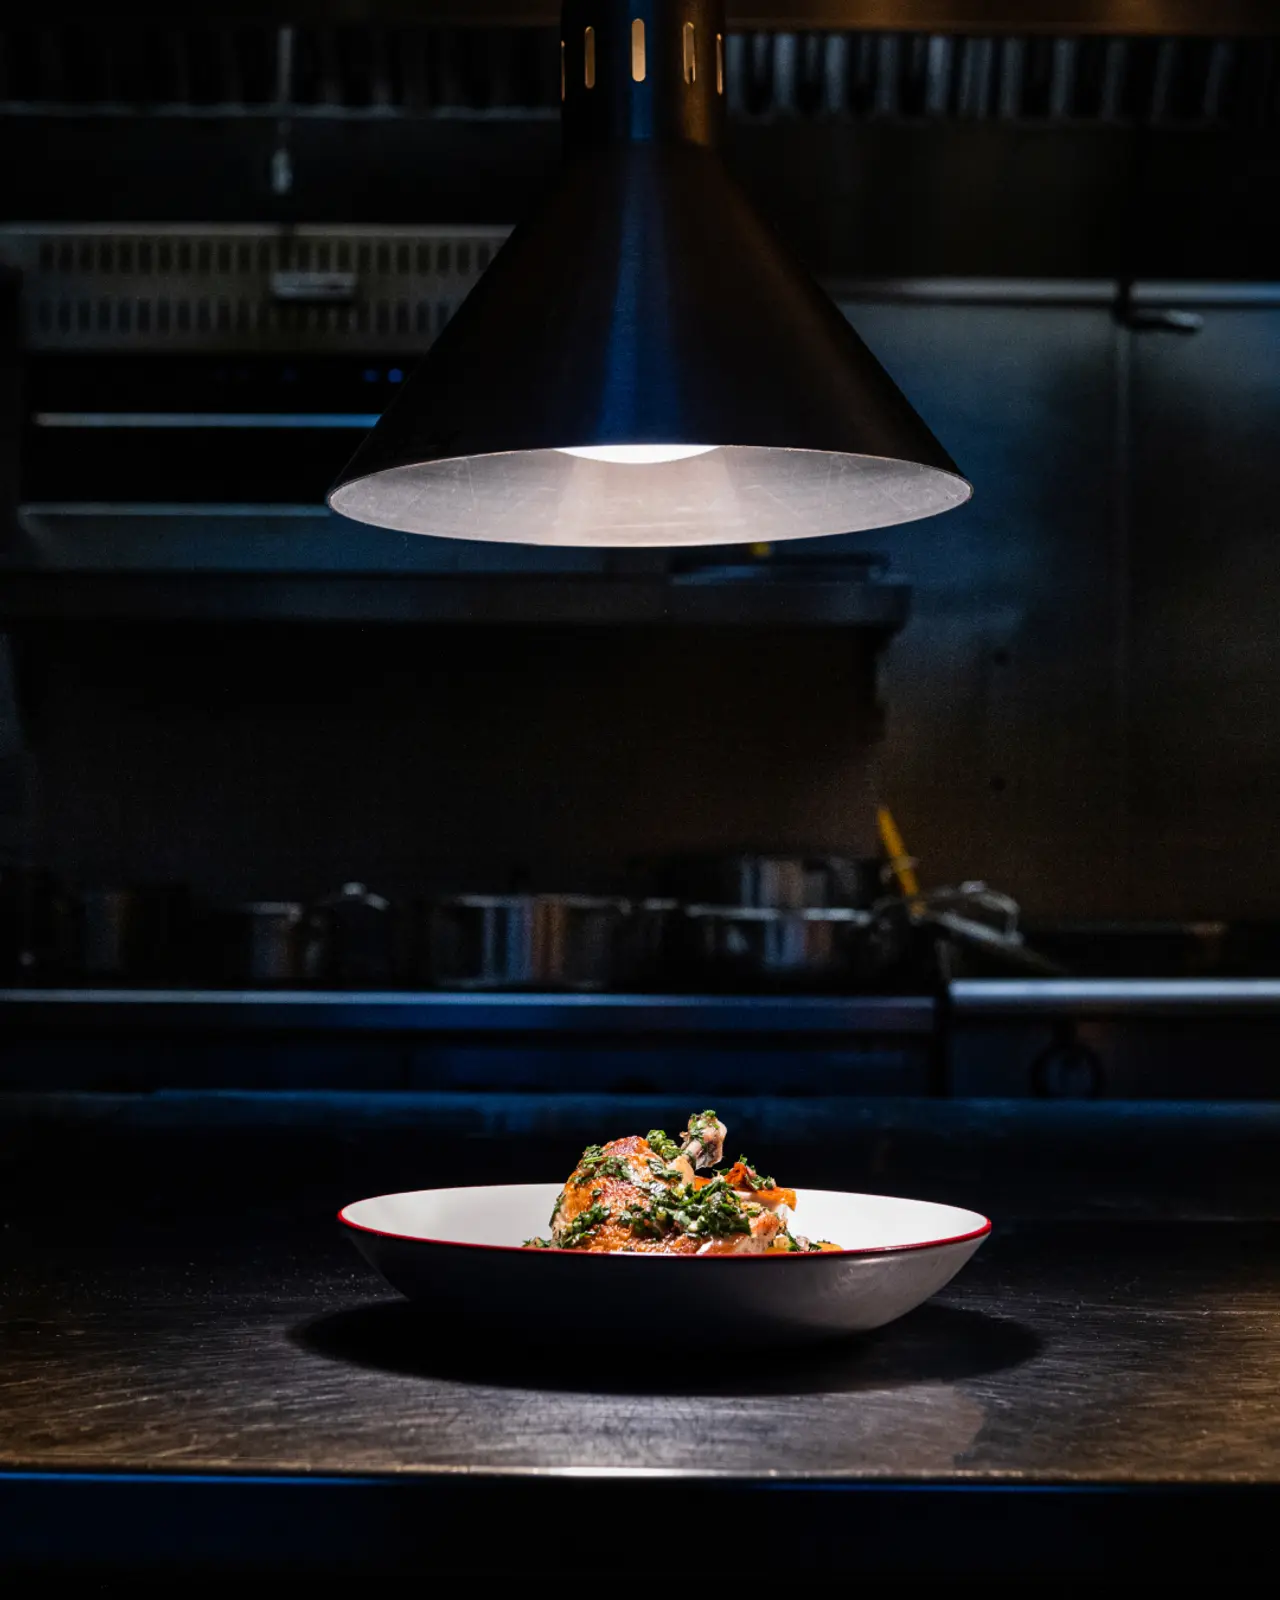 A spotlight illuminates a carefully plated dish on a counter in a dark professional kitchen setting.